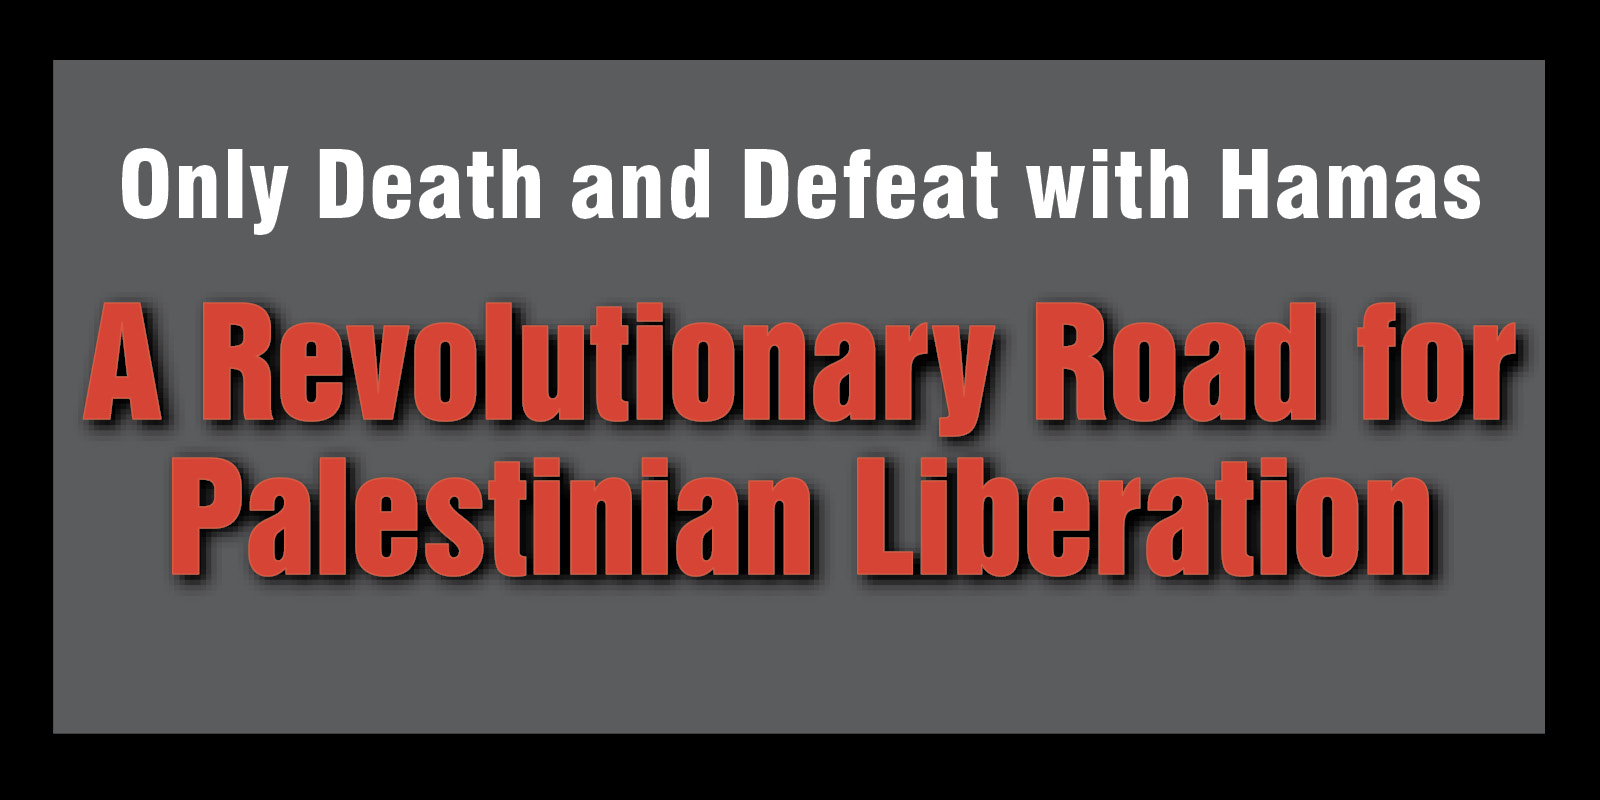 A Revolutionary Road for Palestinian Liberation